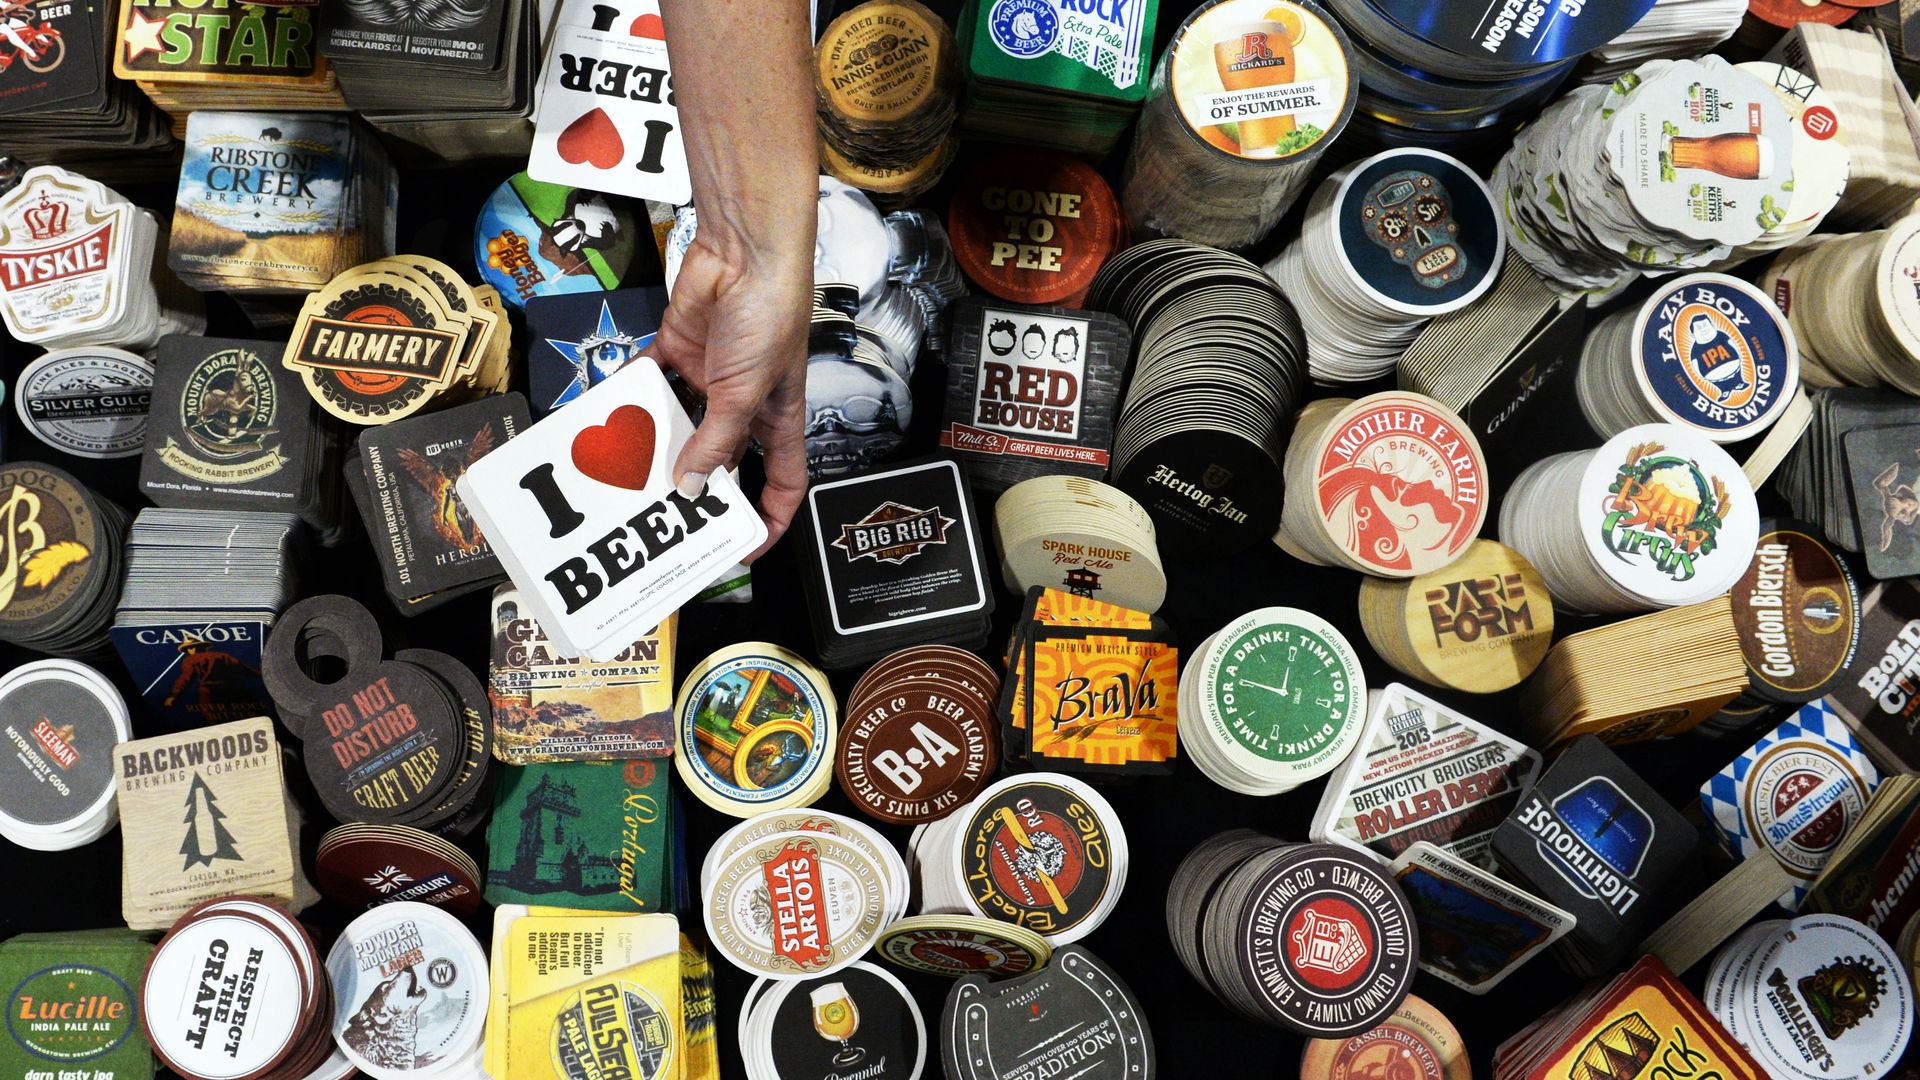 A vendor at the 2014 Craft Brewers Conference in Denver. Photo: RJ Sangosti/The Denver Post via Getty Images